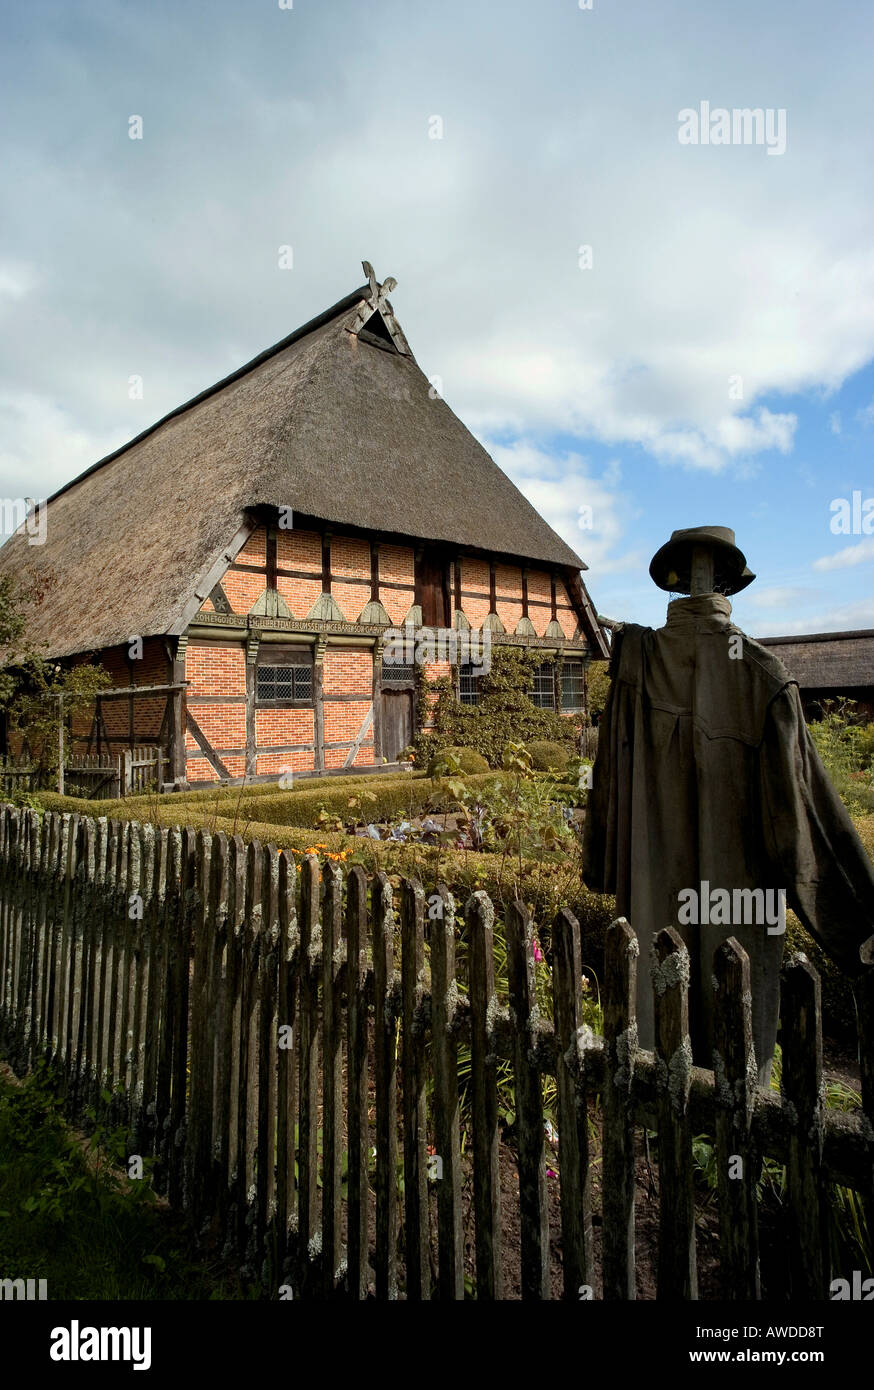 Farmhouse in Hoesseringen living history museum, Lower Saxony, Germany, Europe Stock Photo